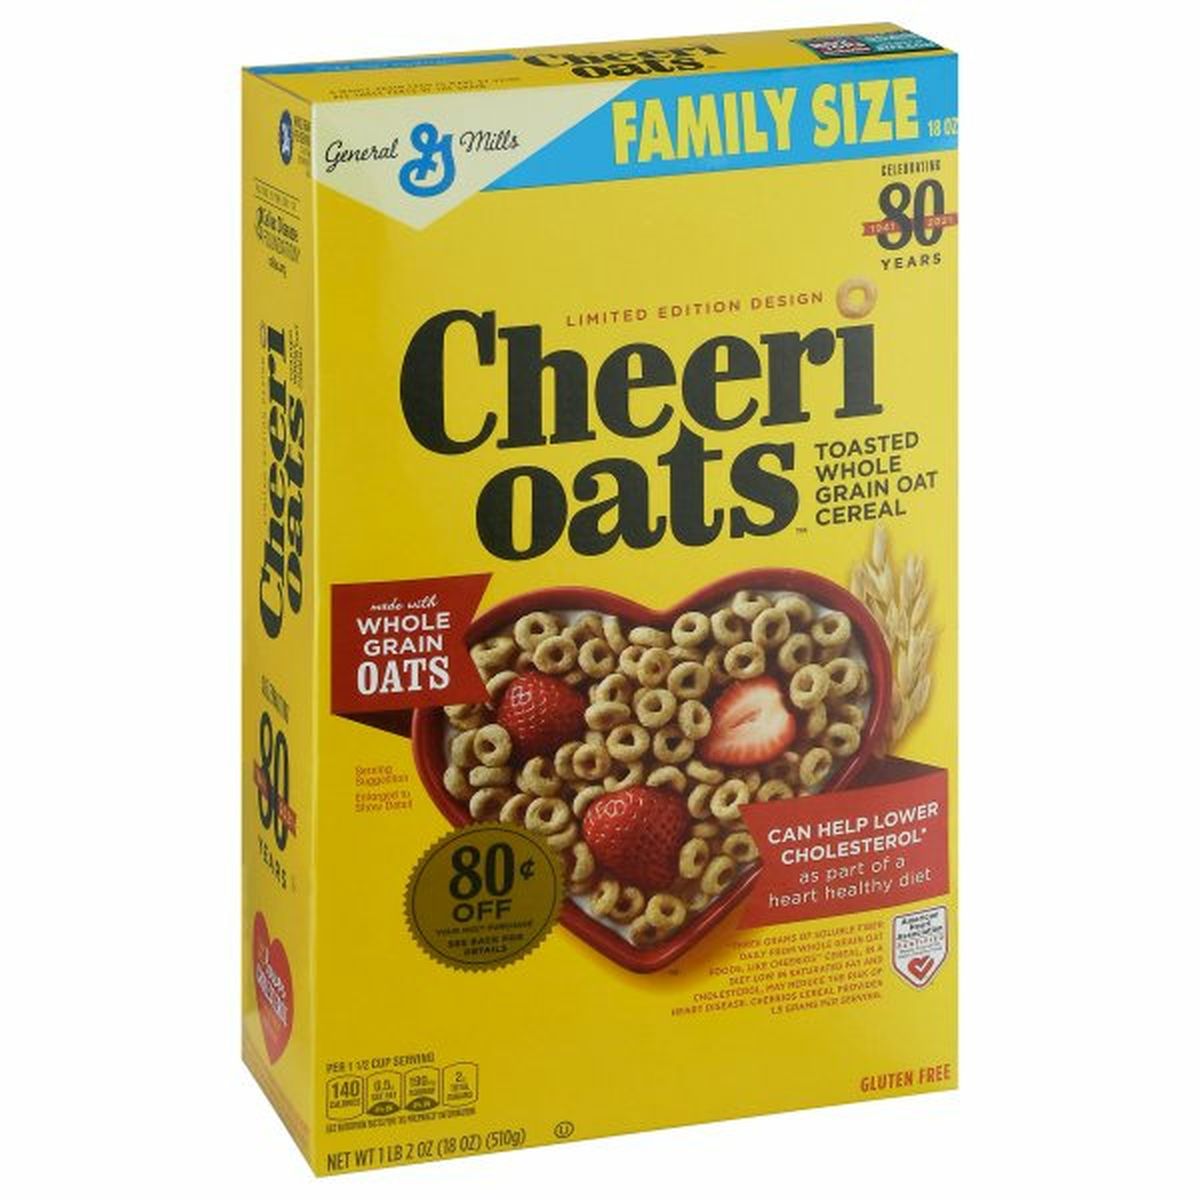 Calories in Original Cheerios Oat Cereal, Whole Grain, Toasted, Family Size